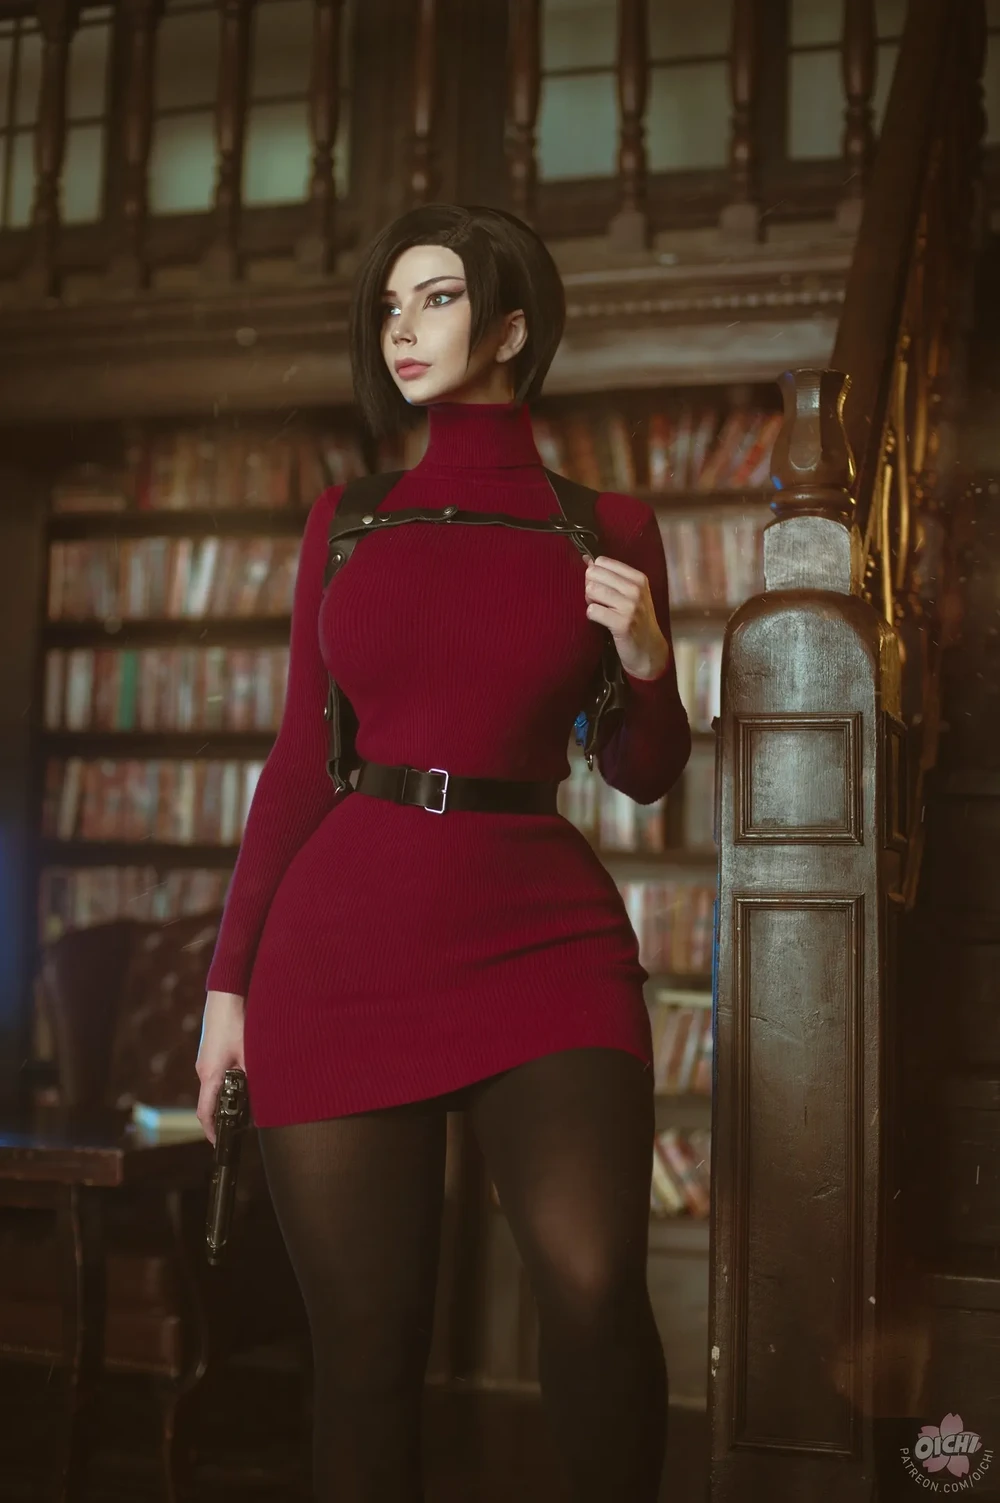 Ada Wong from Resident Evil in a new image: OICHI cosplayer impressed with her talent #0